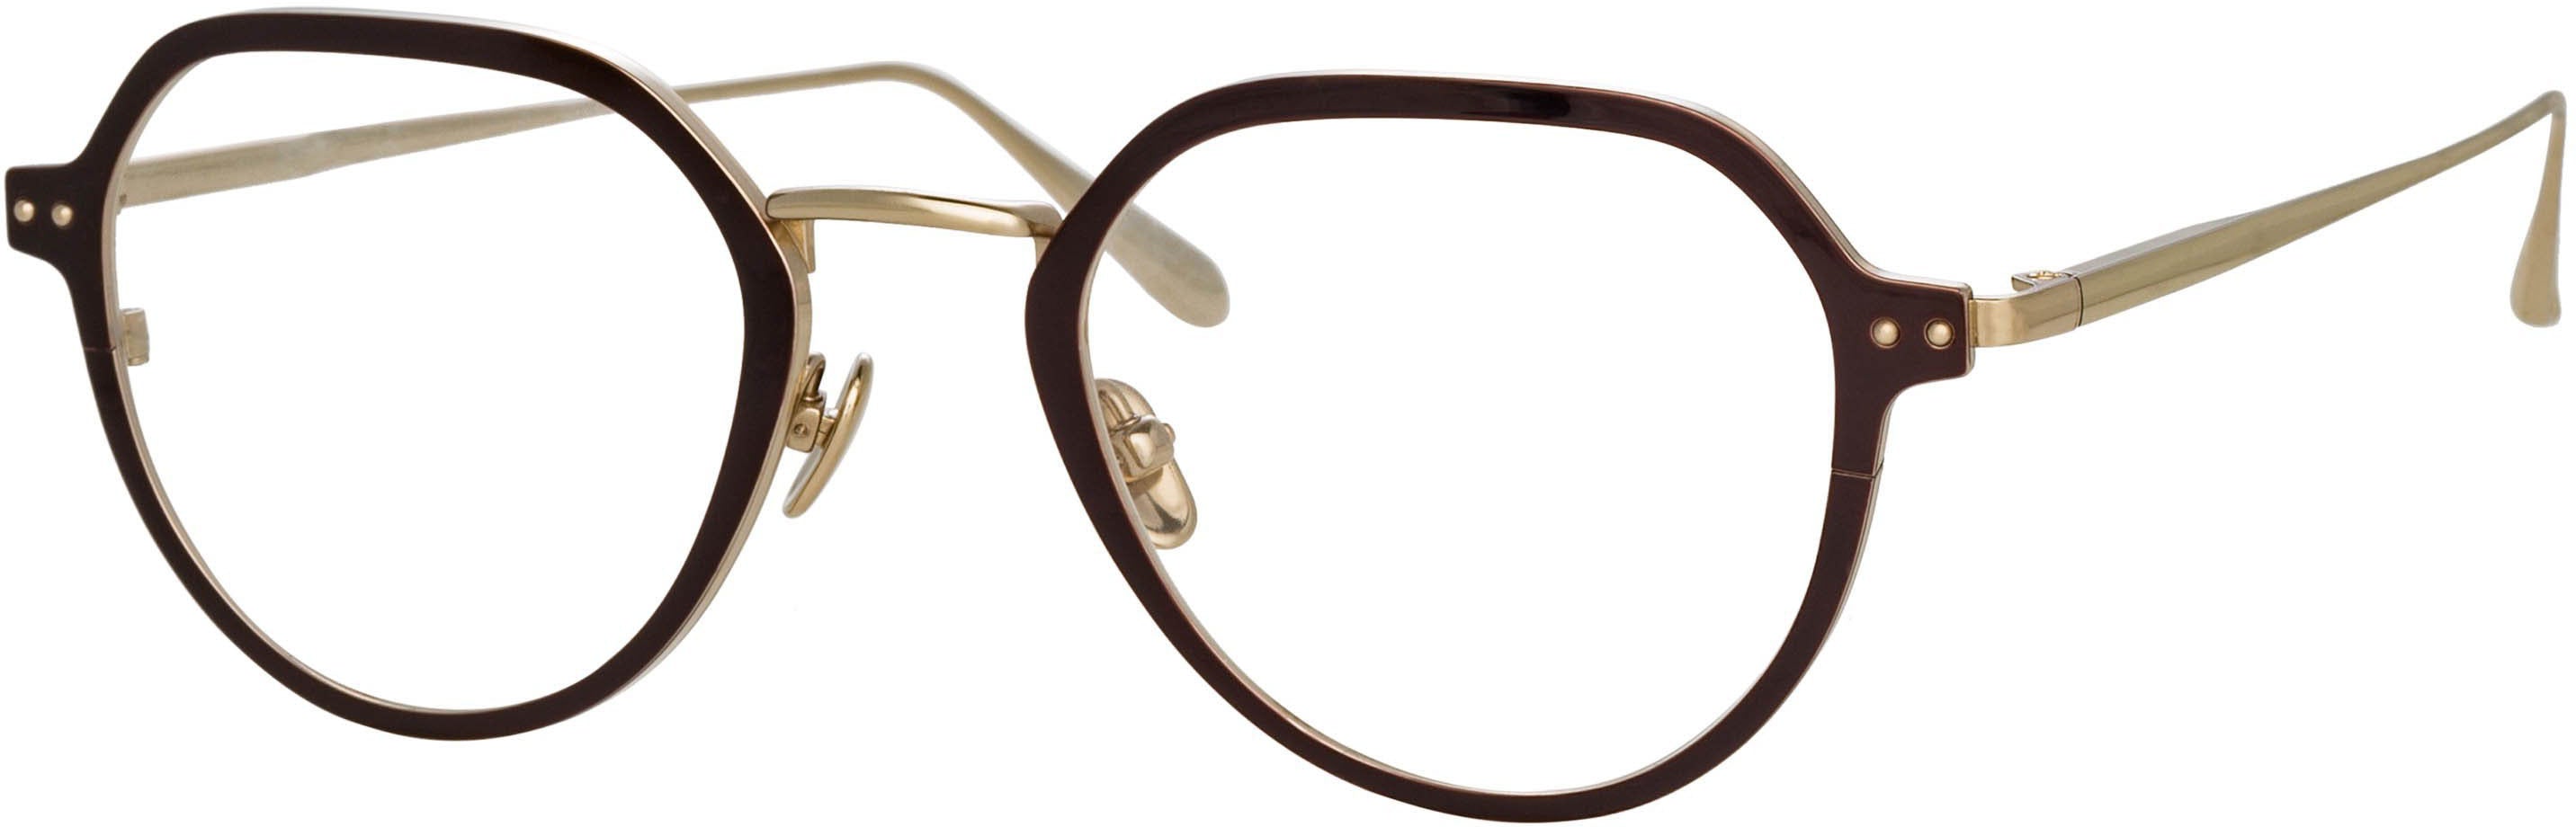 Color_LFL1218C3OPT - Axel Angular Optical Frame in Light Gold and Brown